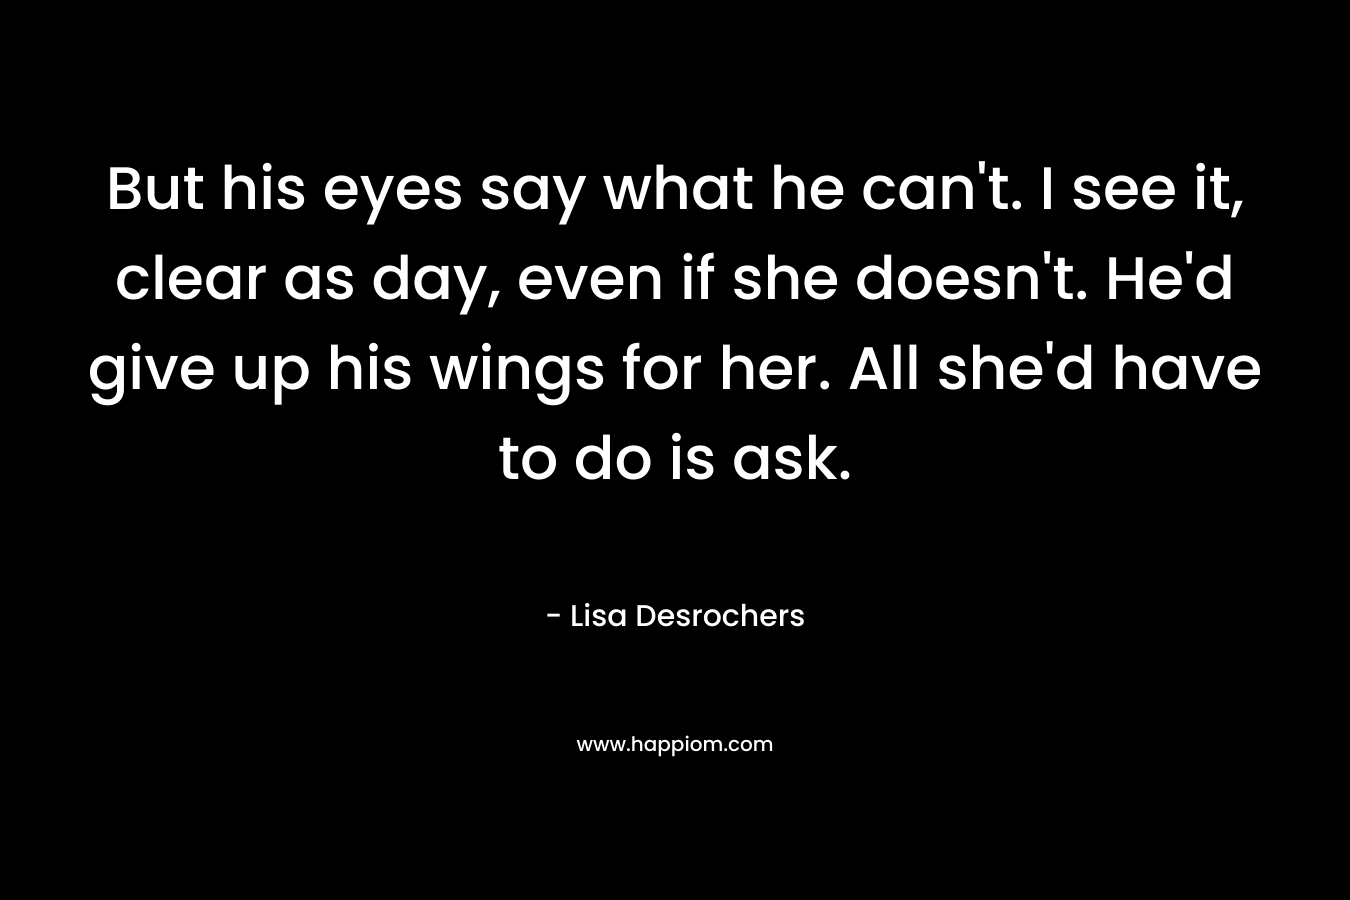 But his eyes say what he can’t. I see it, clear as day, even if she doesn’t. He’d give up his wings for her. All she’d have to do is ask. – Lisa Desrochers